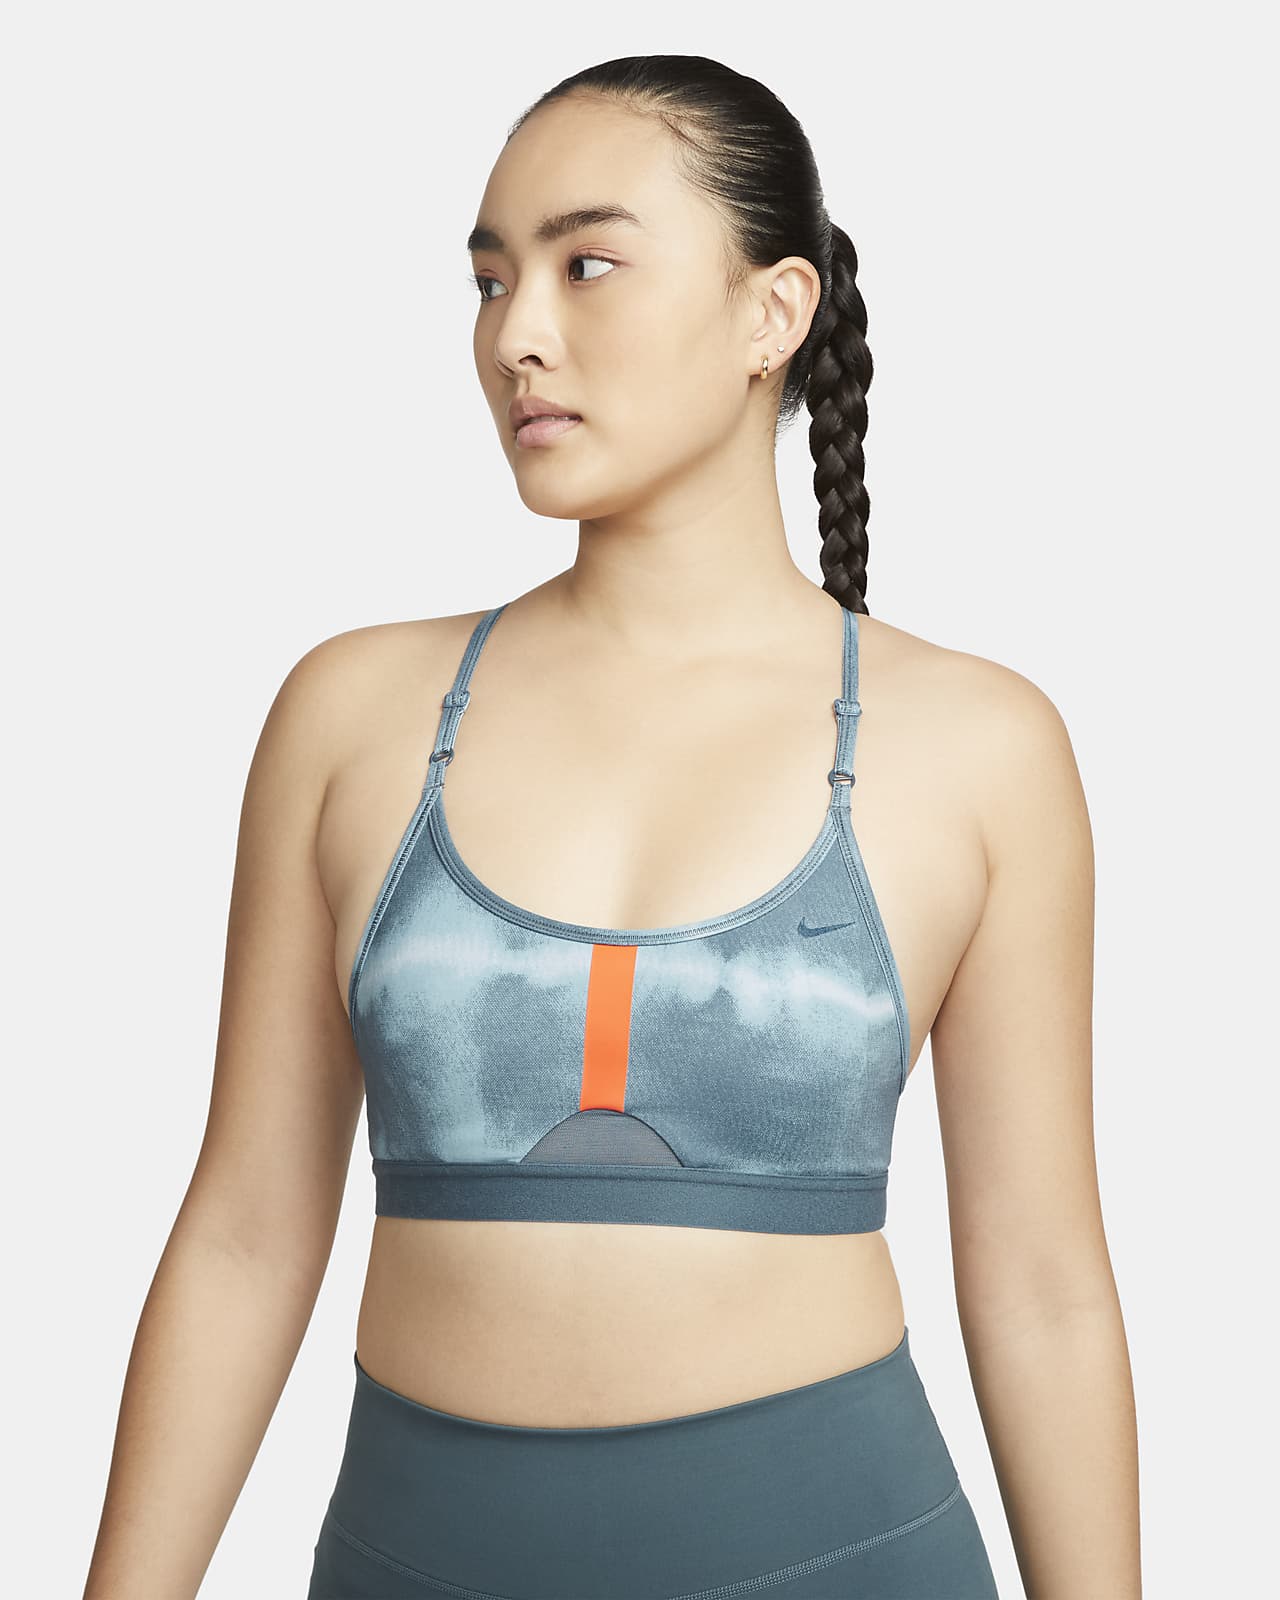 Nike Dri-FIT Indy Women's Light-Support Padded All-Over Print Sports Bra